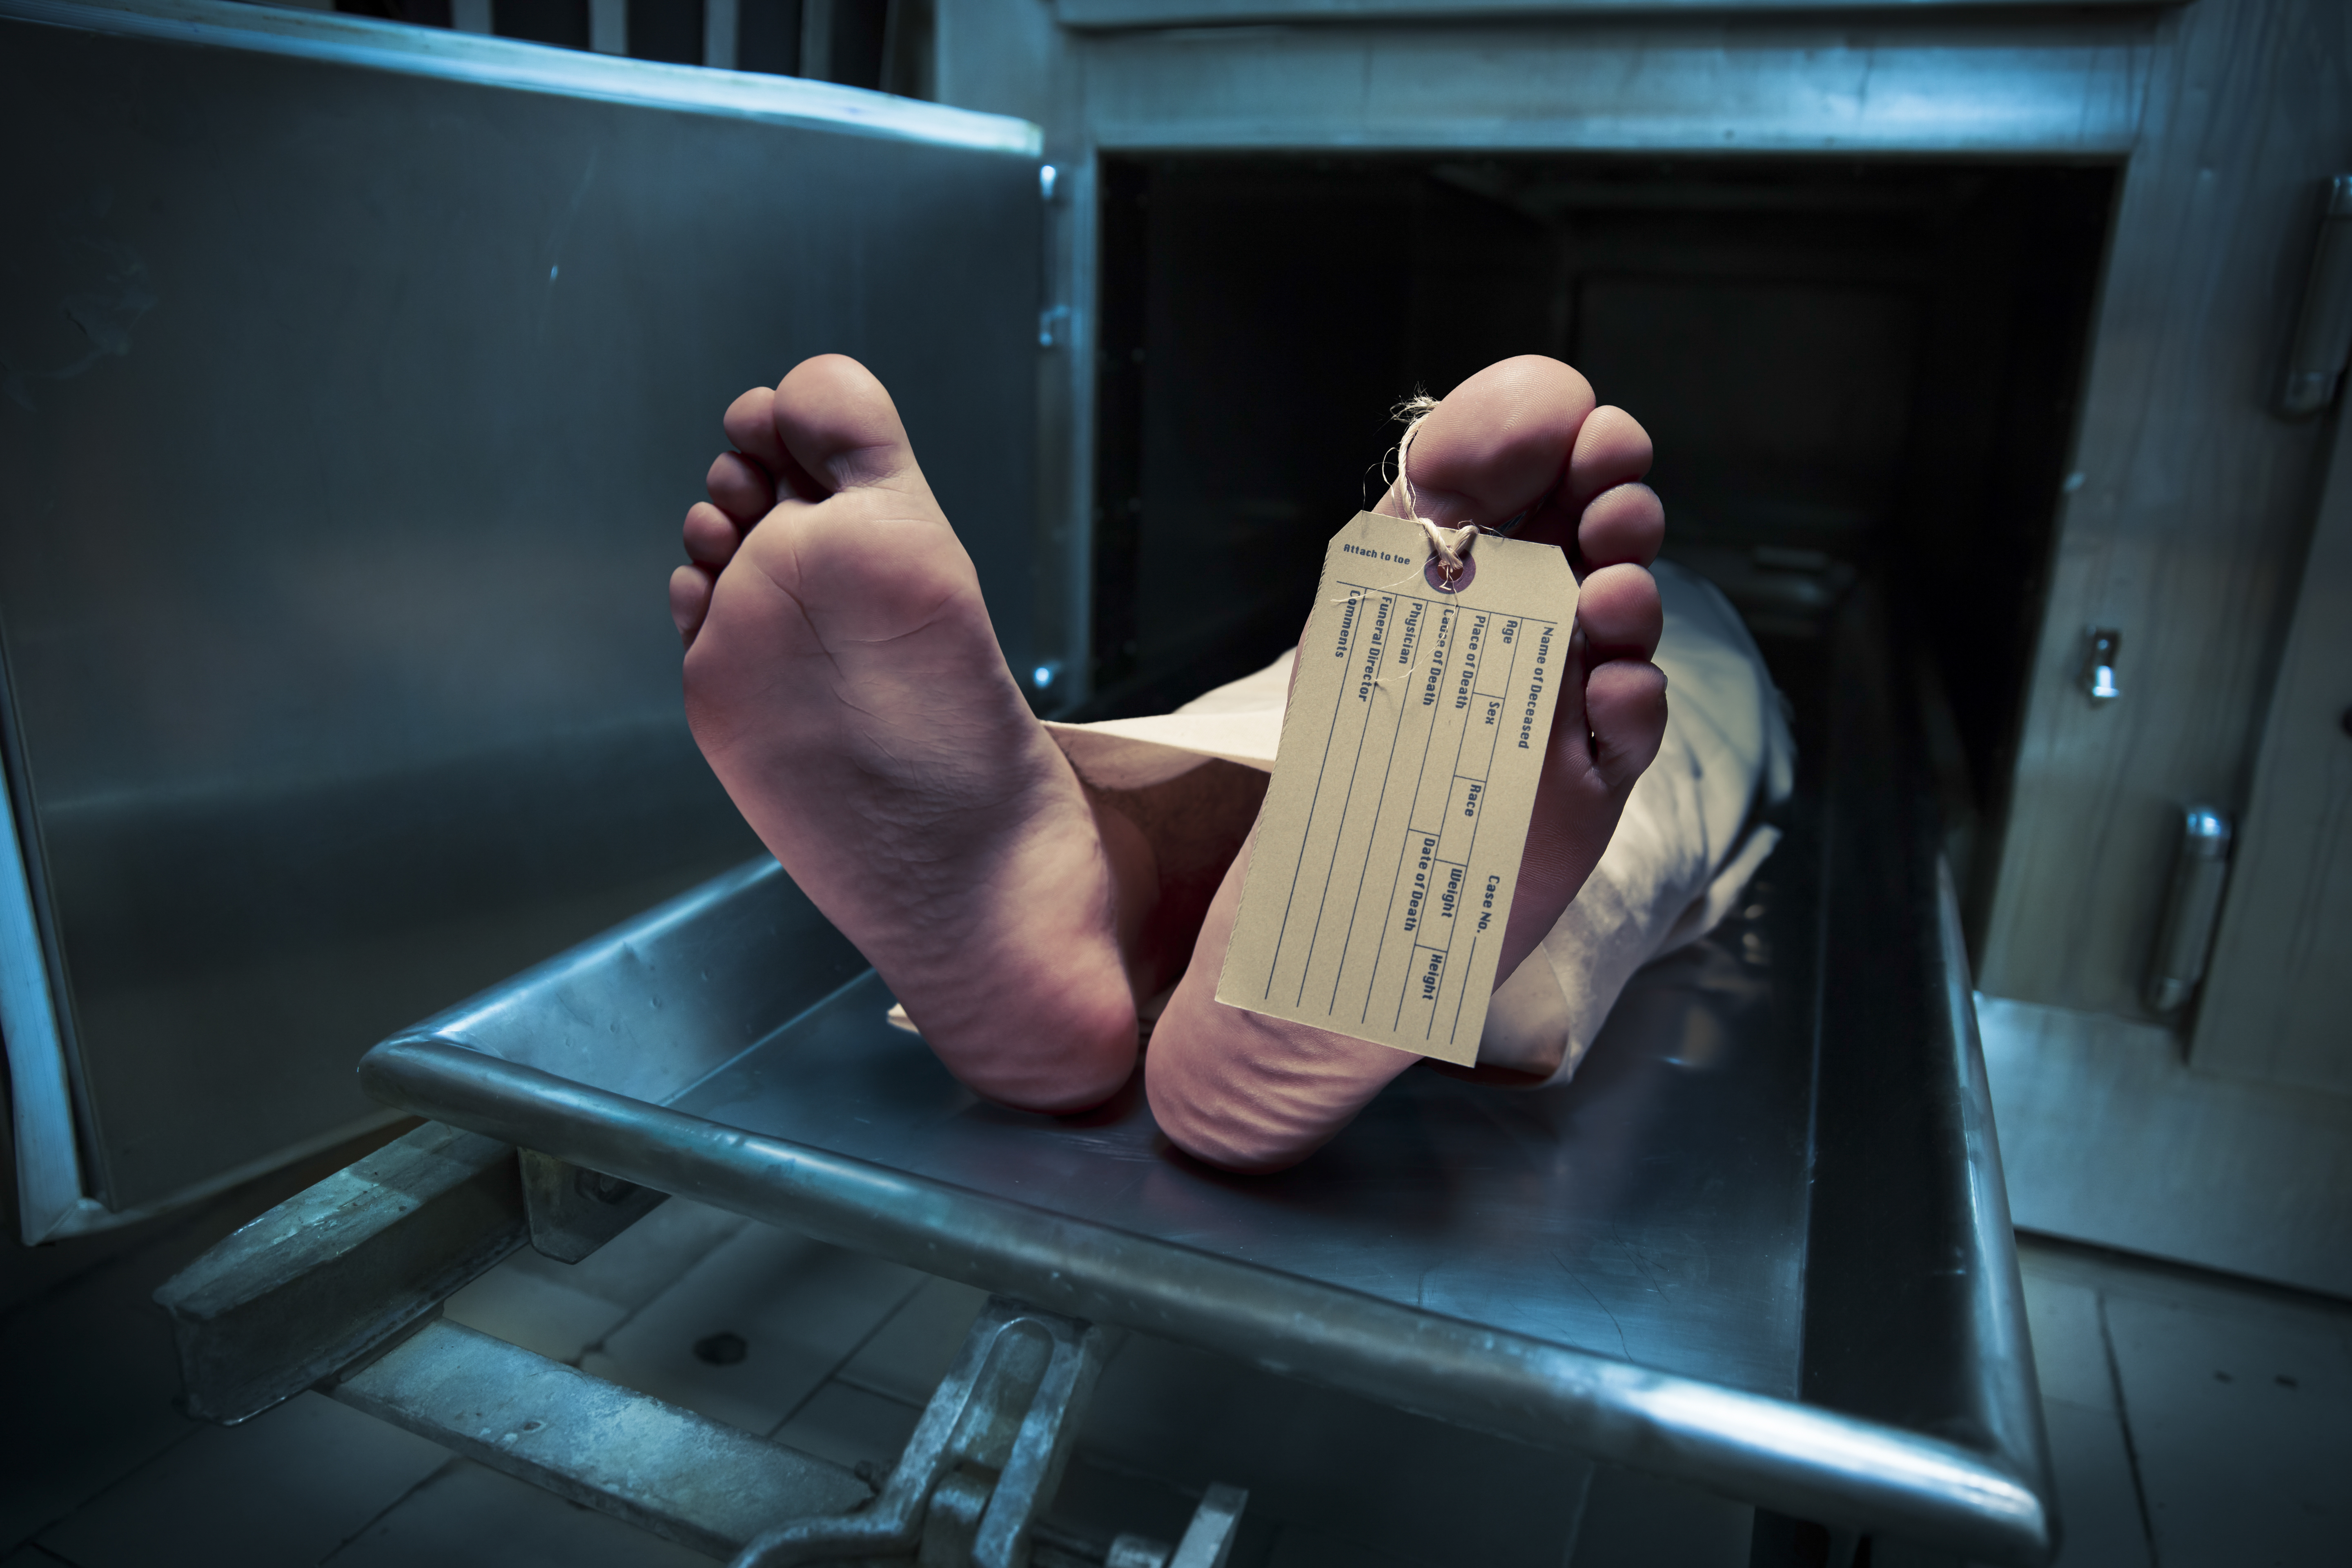 Feet with toe tag on a morgue table | Source: Shutterstock